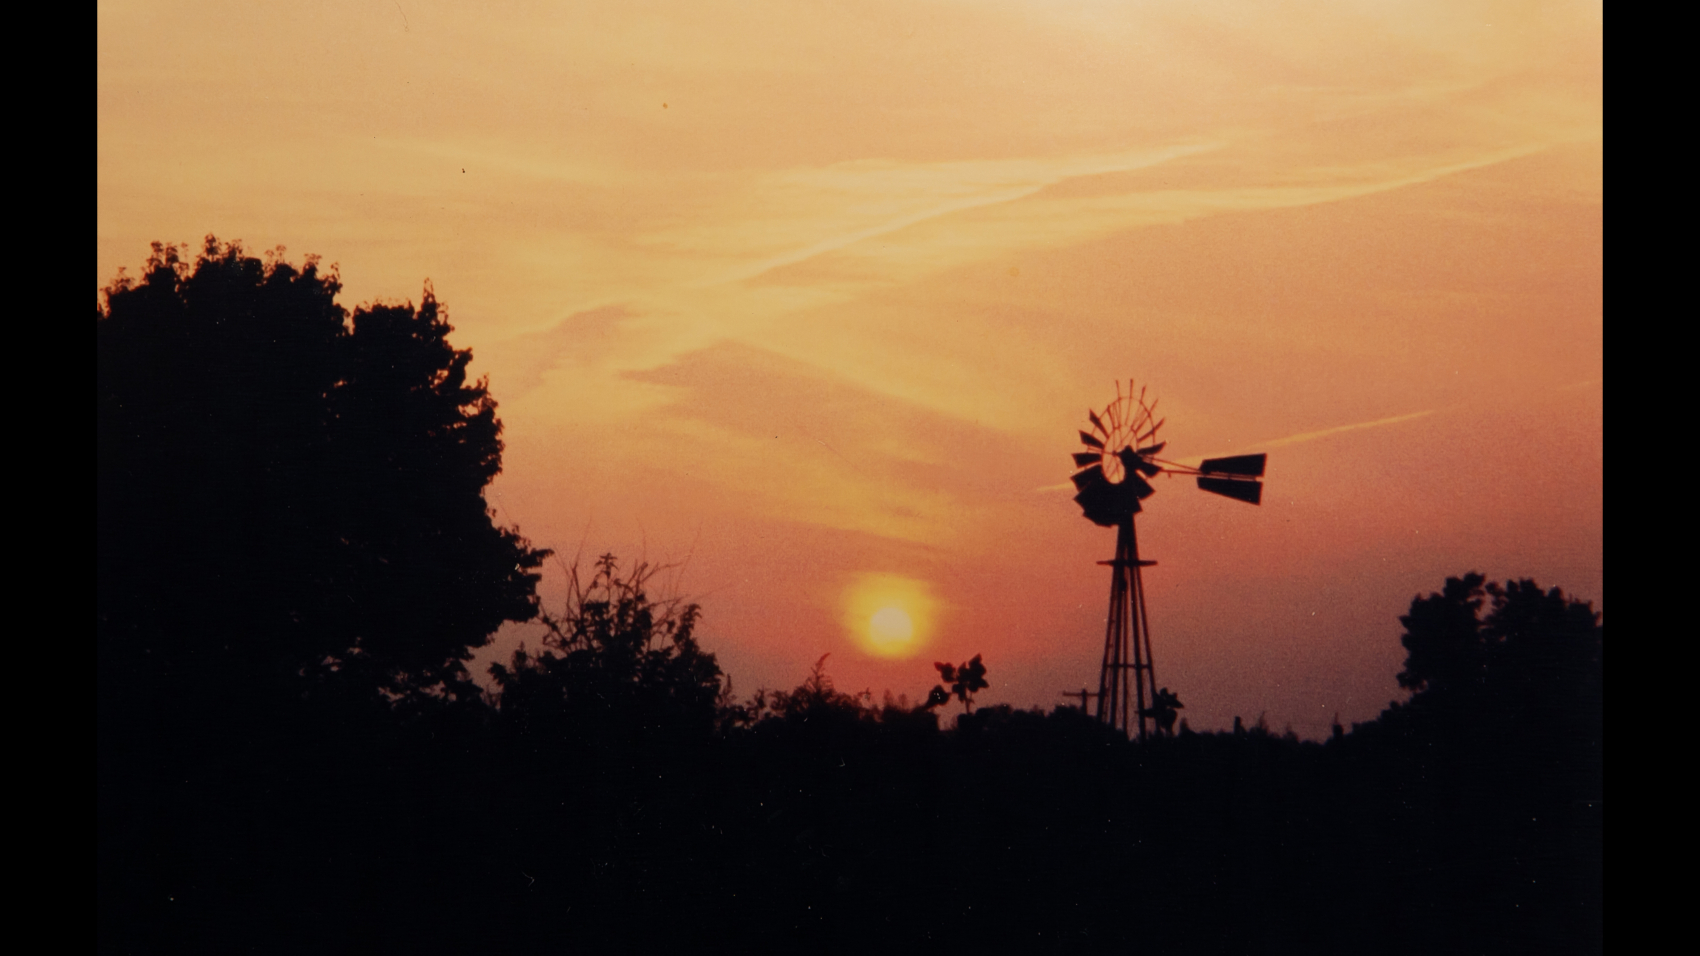 Photography - Sunset - photograph of golden yellow sunset looking through the trees and past a windmill in the distance.